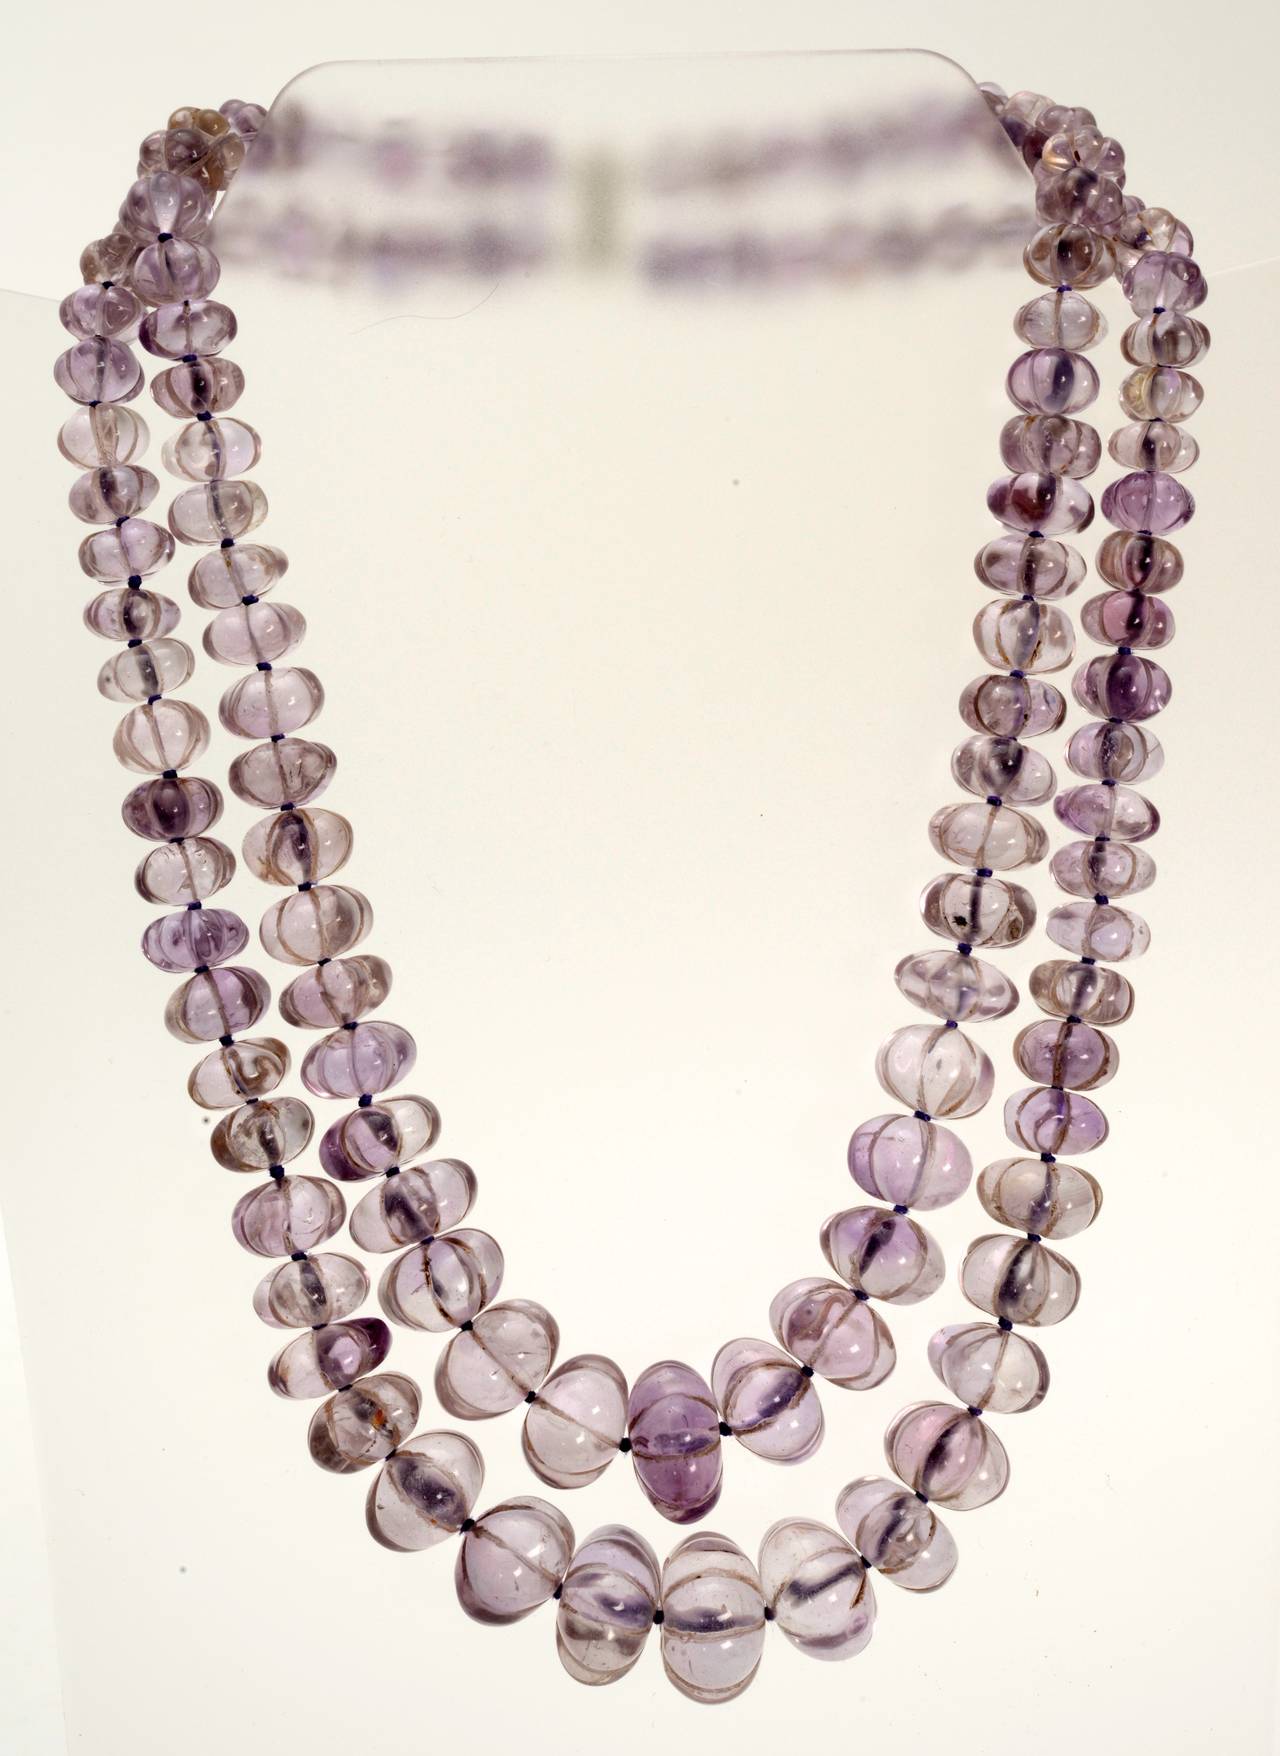 A spectacular double strand hand-carved amethyst bead necklace. Bead sizes range from 3/8